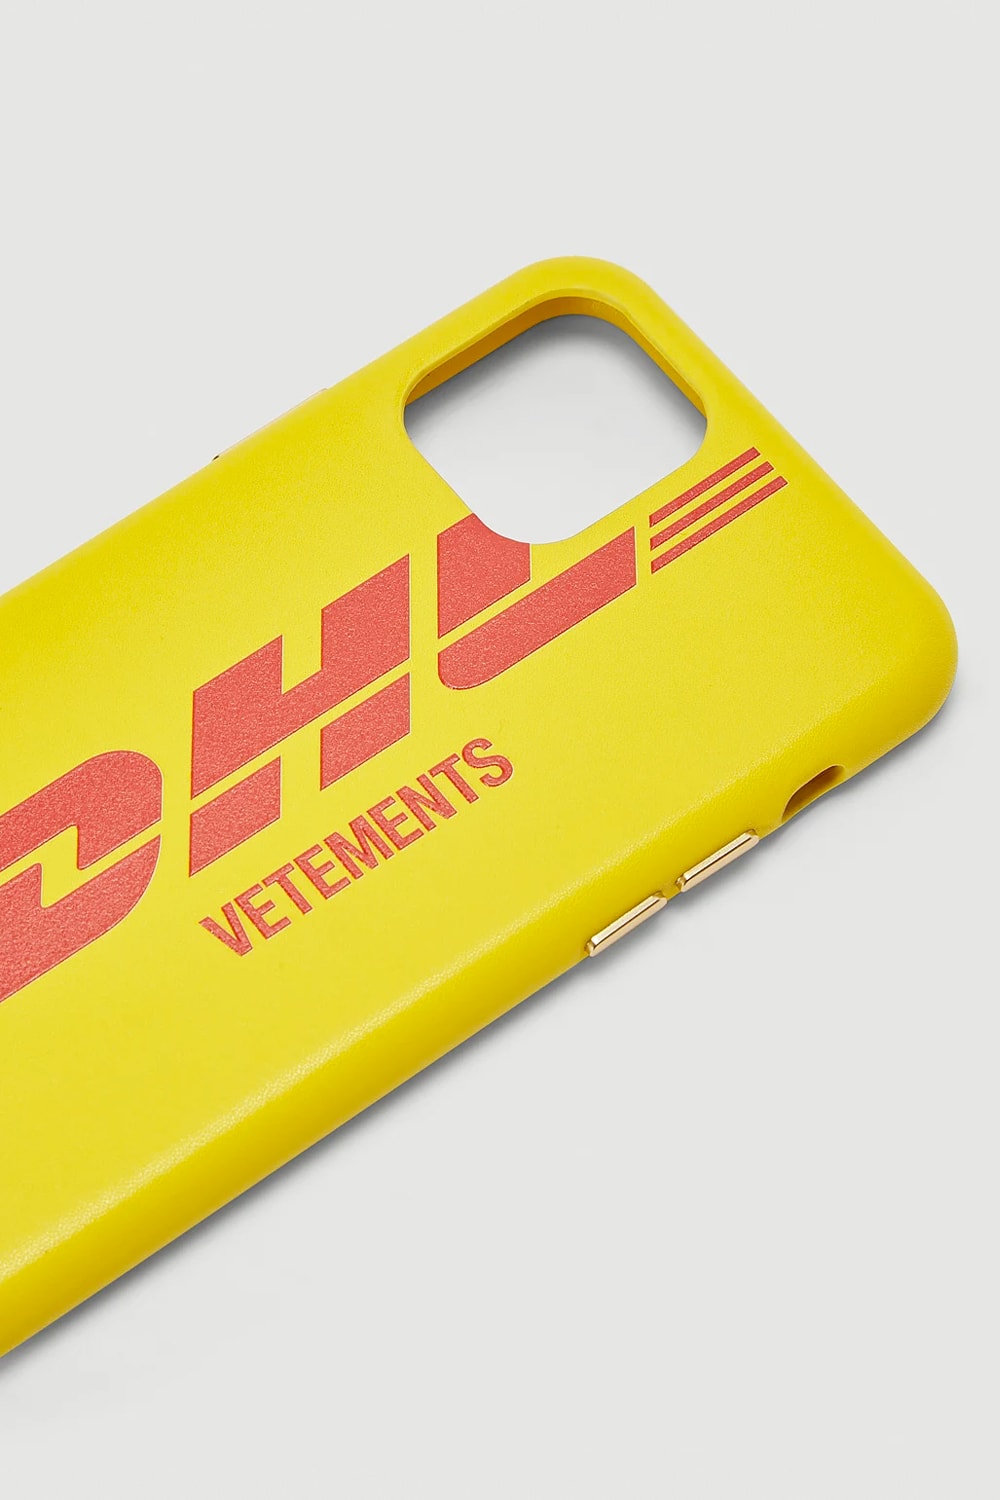 Vetements x DHL Apple iPhone 11 Case Release Info red yellow 2017 2018 